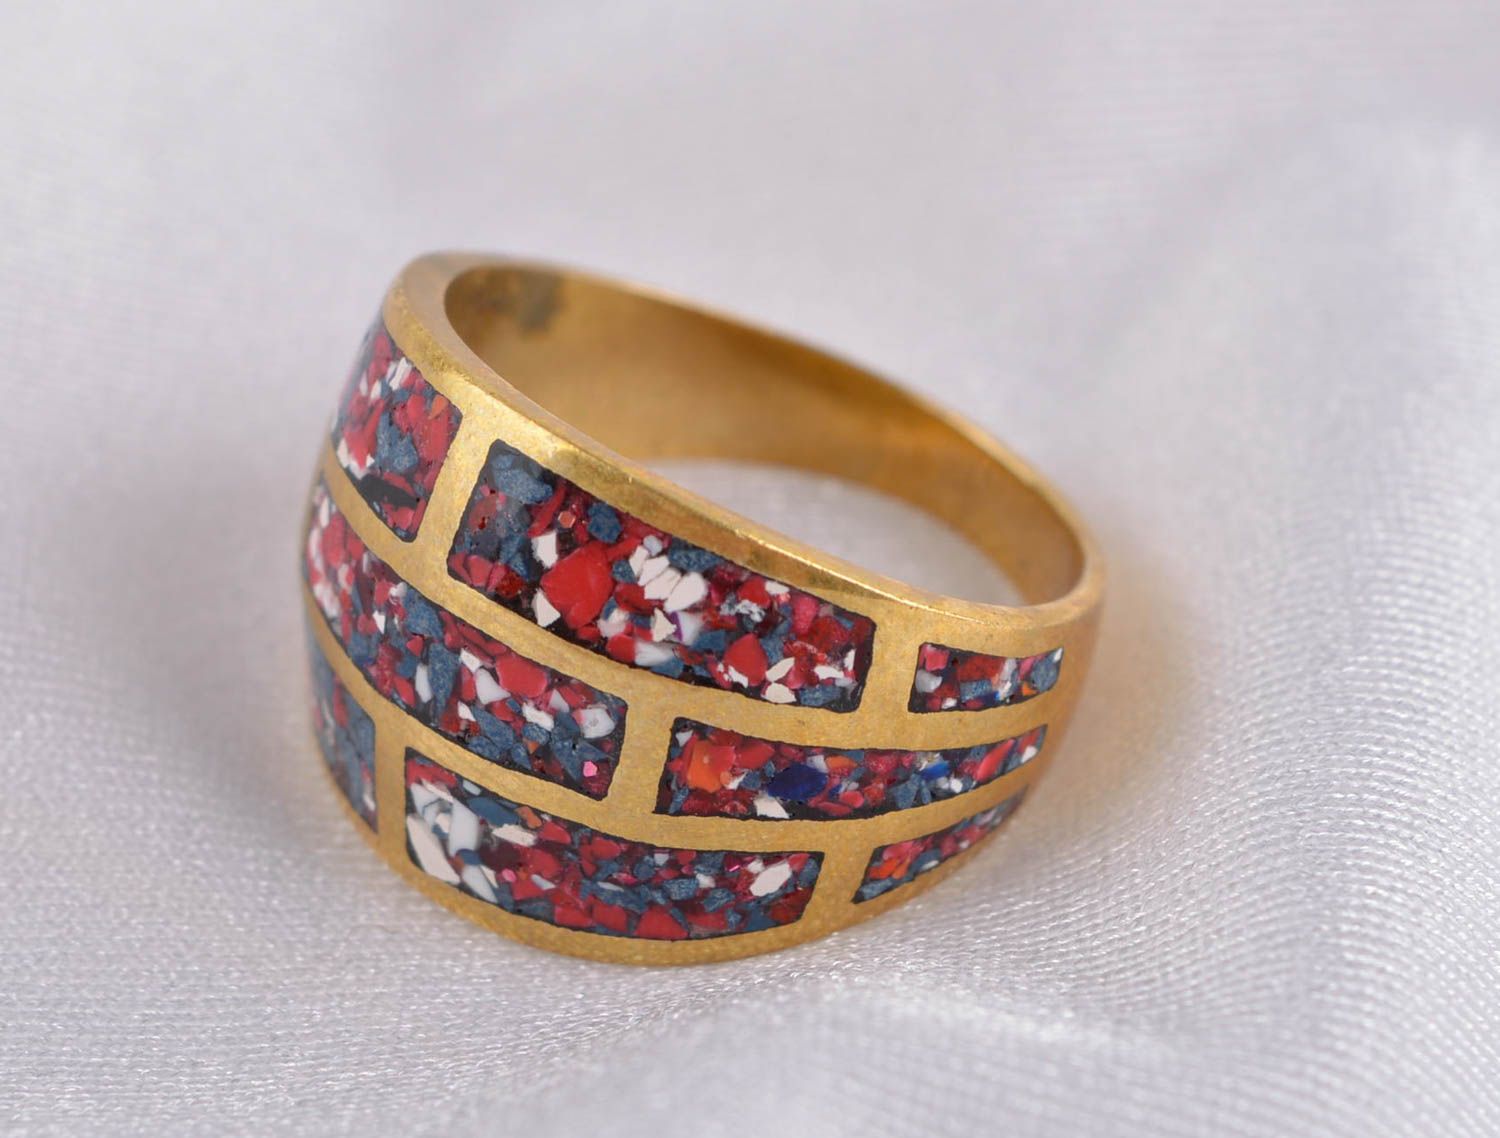 Fashion ring handmade brass ring with natural stones trendy jewelry metal ring photo 1